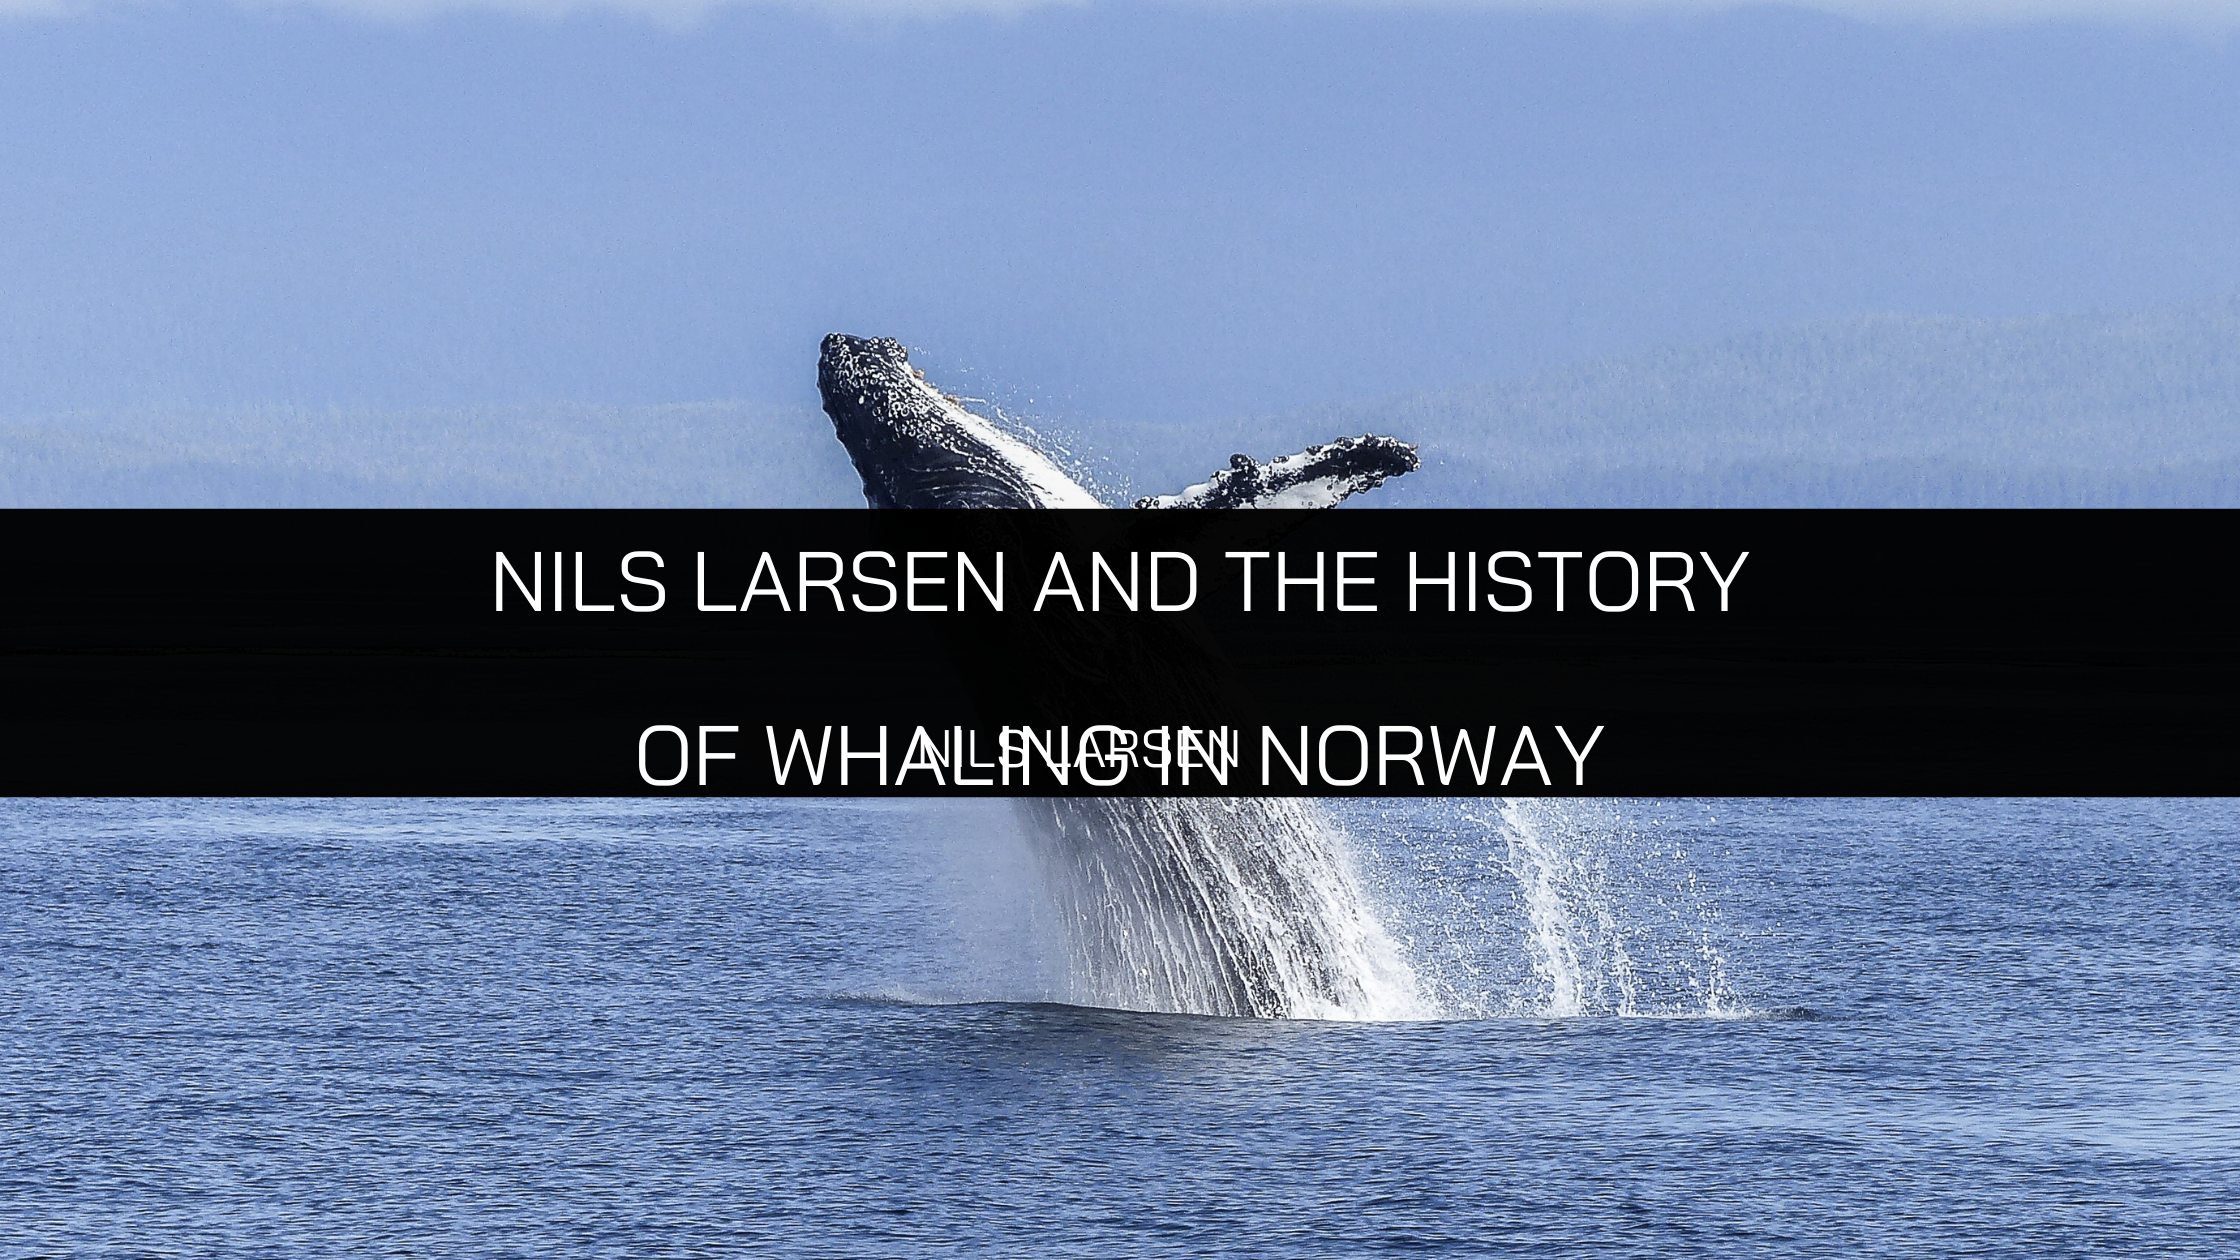 Nils Larsen and the History of Whaling in Norway